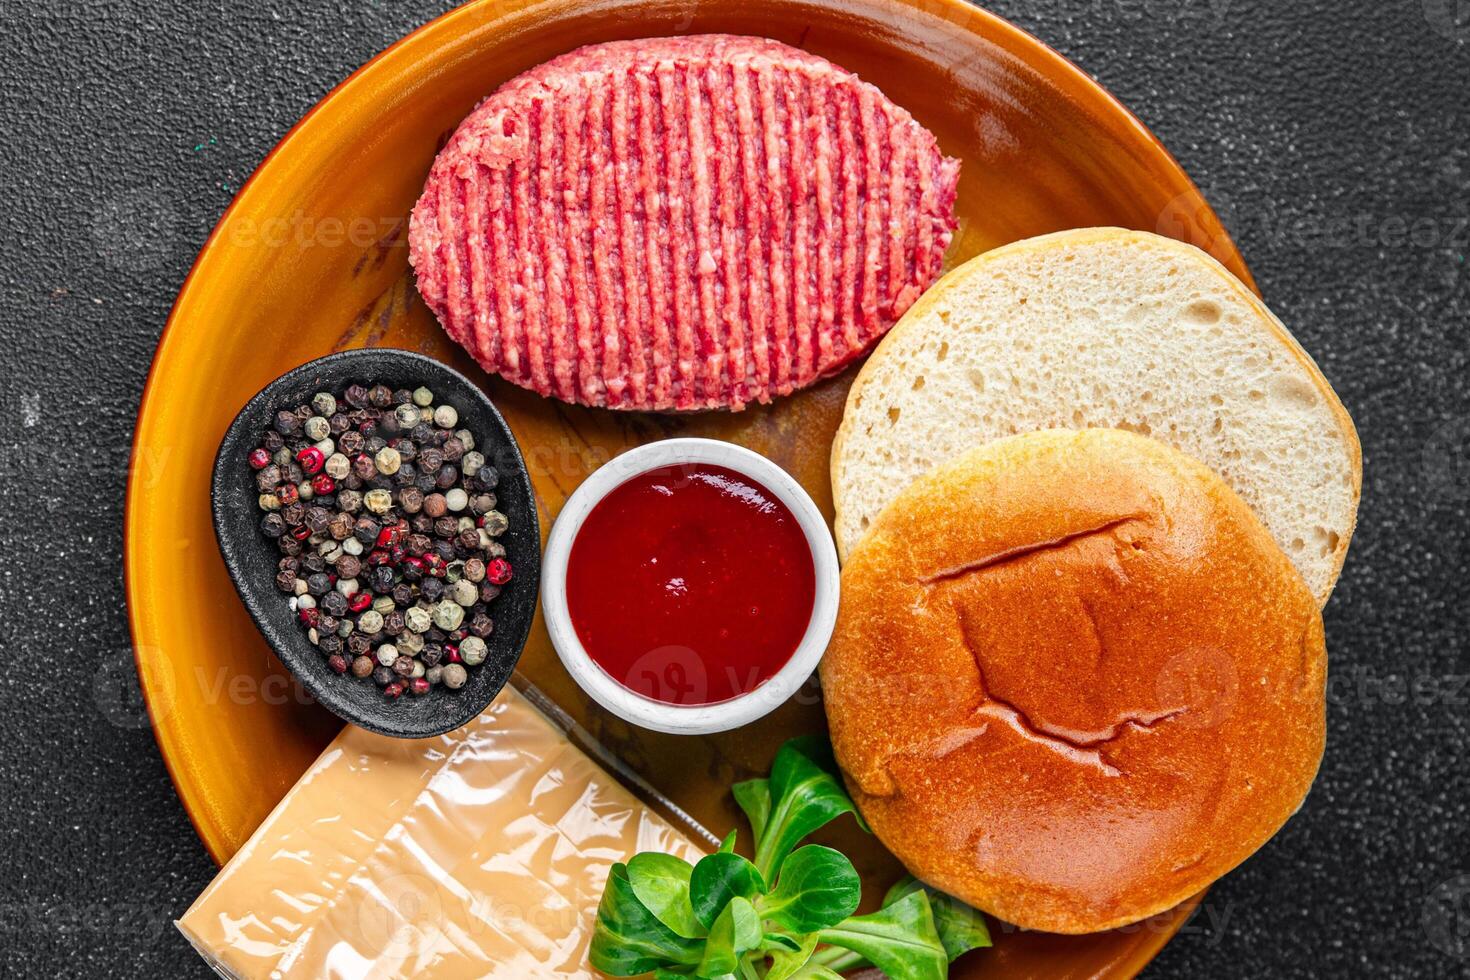 burger set raw cutlet, bun, cheese, tomato sauce, greens fresh cooking appetizer meal food snack on the table copy space food background rustic photo